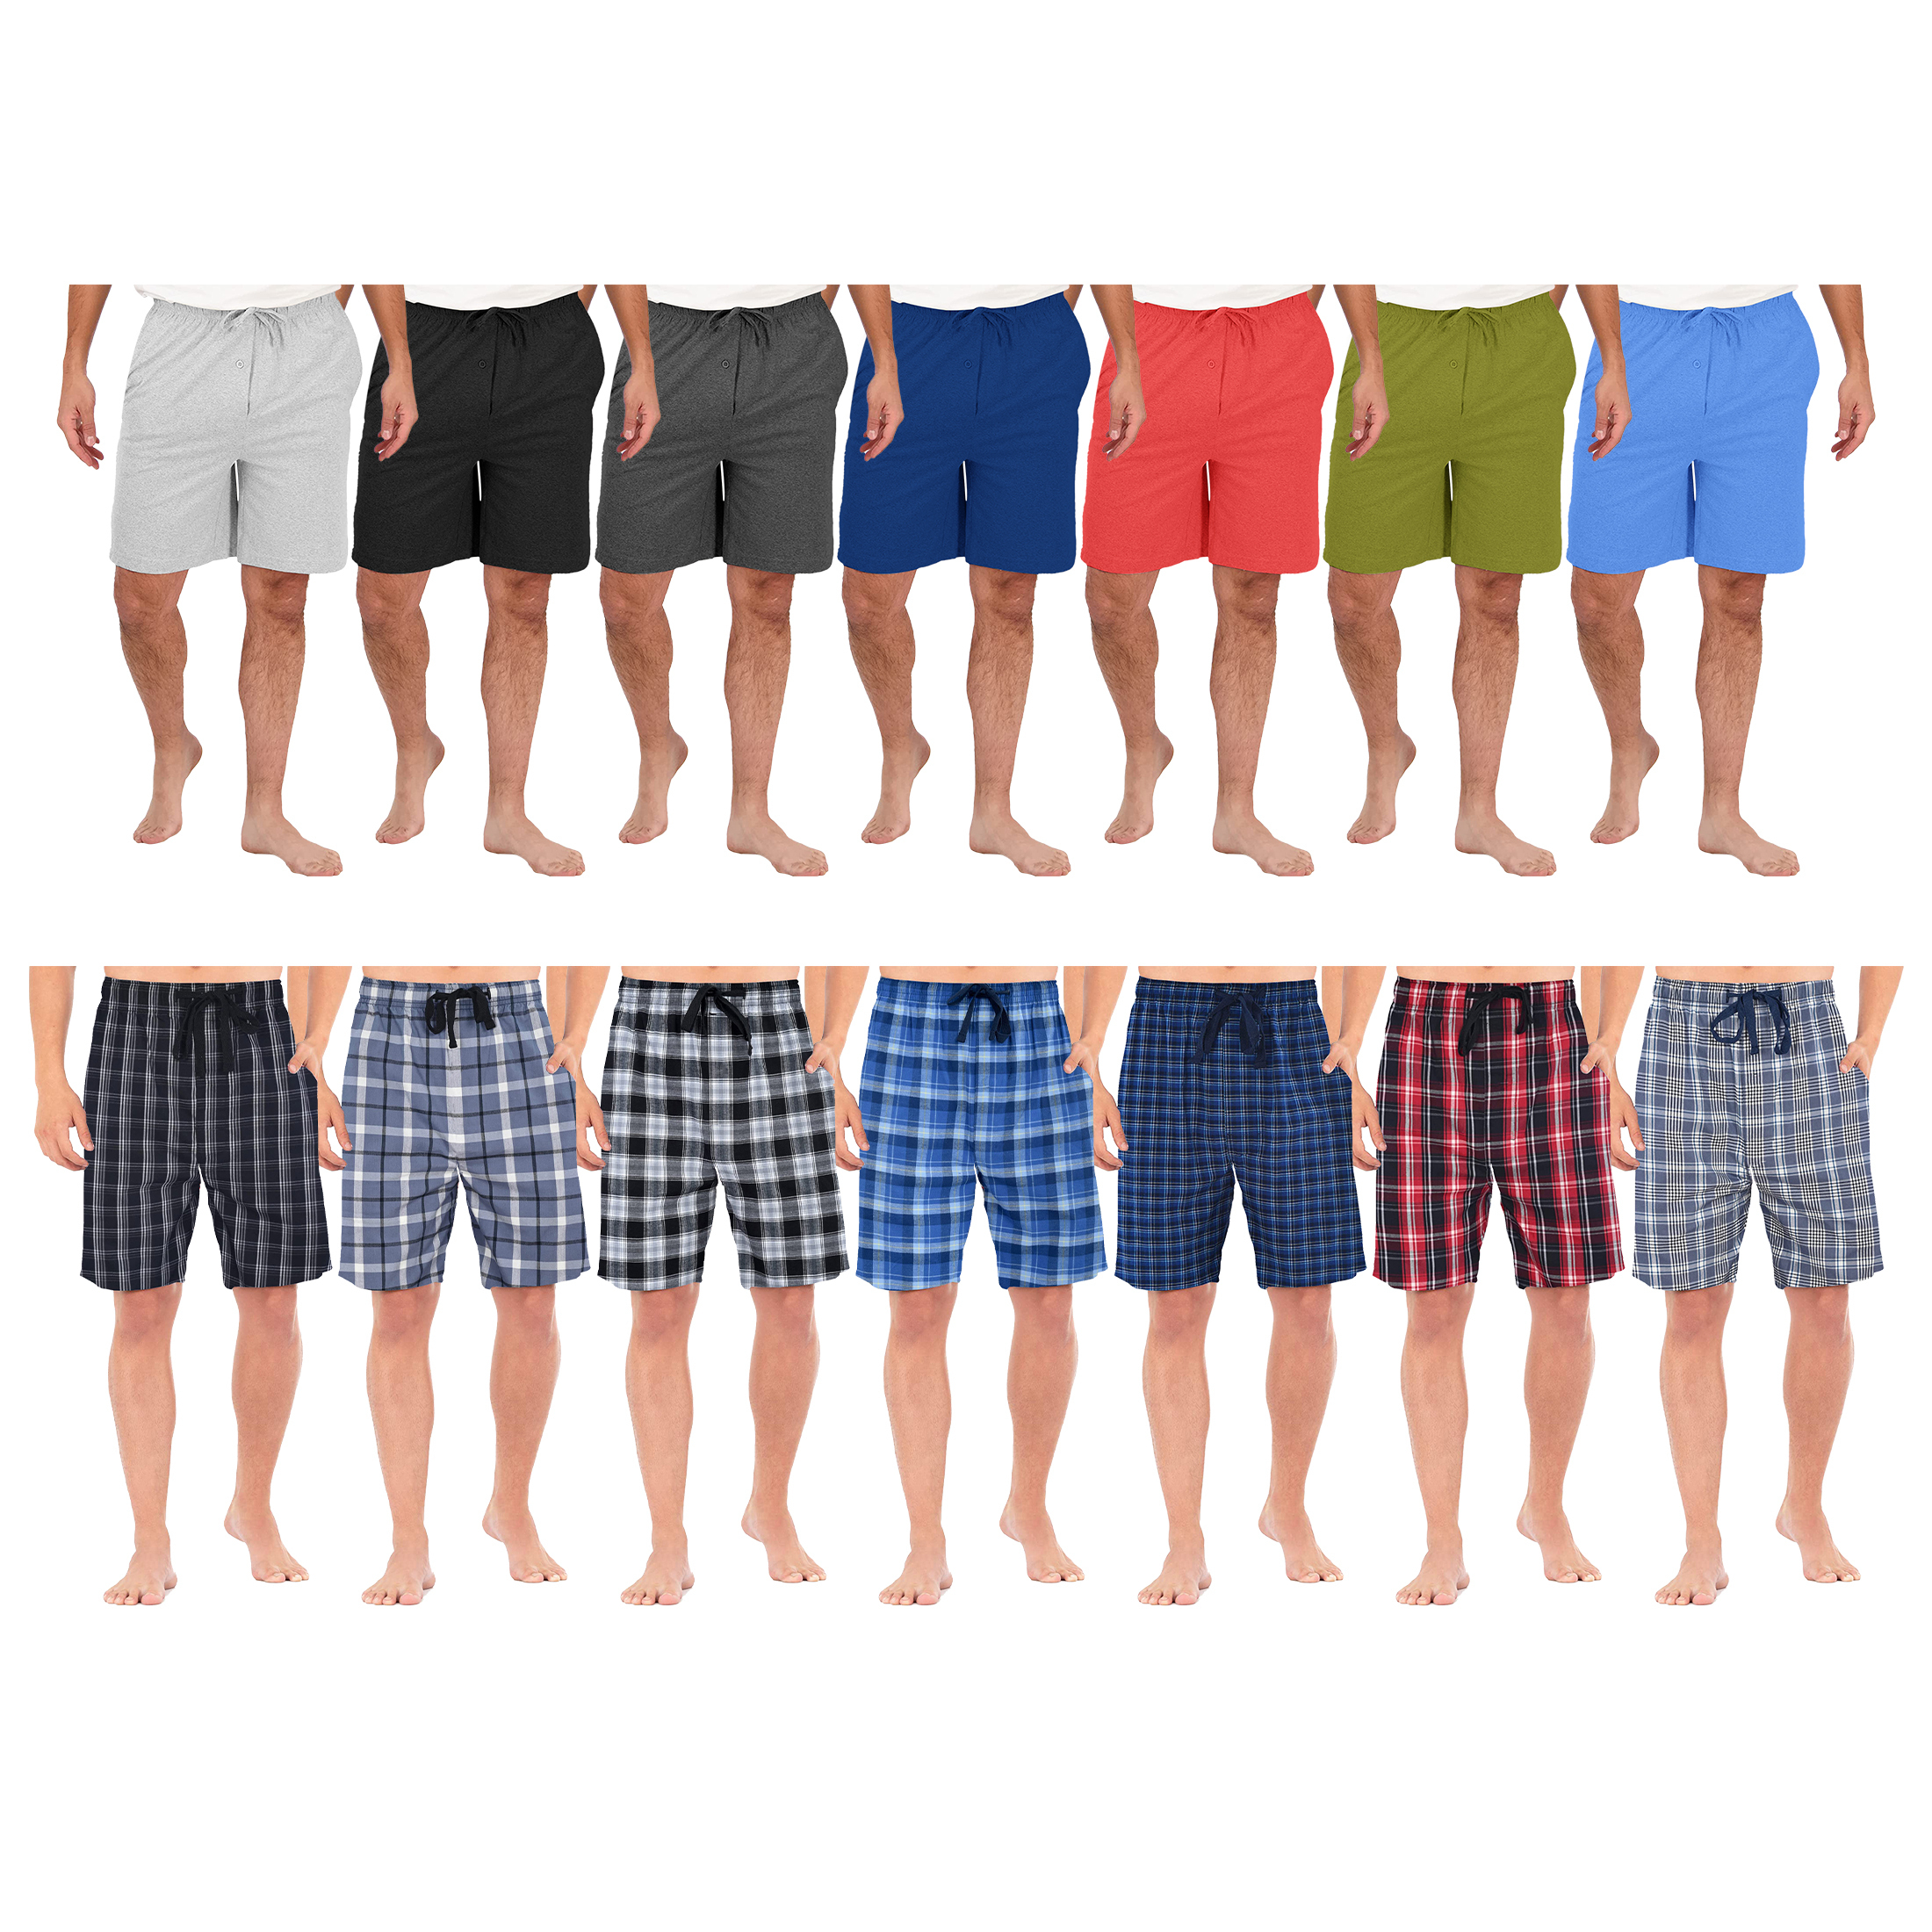 Multi-Pack: Men's Ultra-Soft Jersey Knit Sleep Lounge Pajama Shorts For Sleepwear - Solid & Plaid, 3 Pack, Small